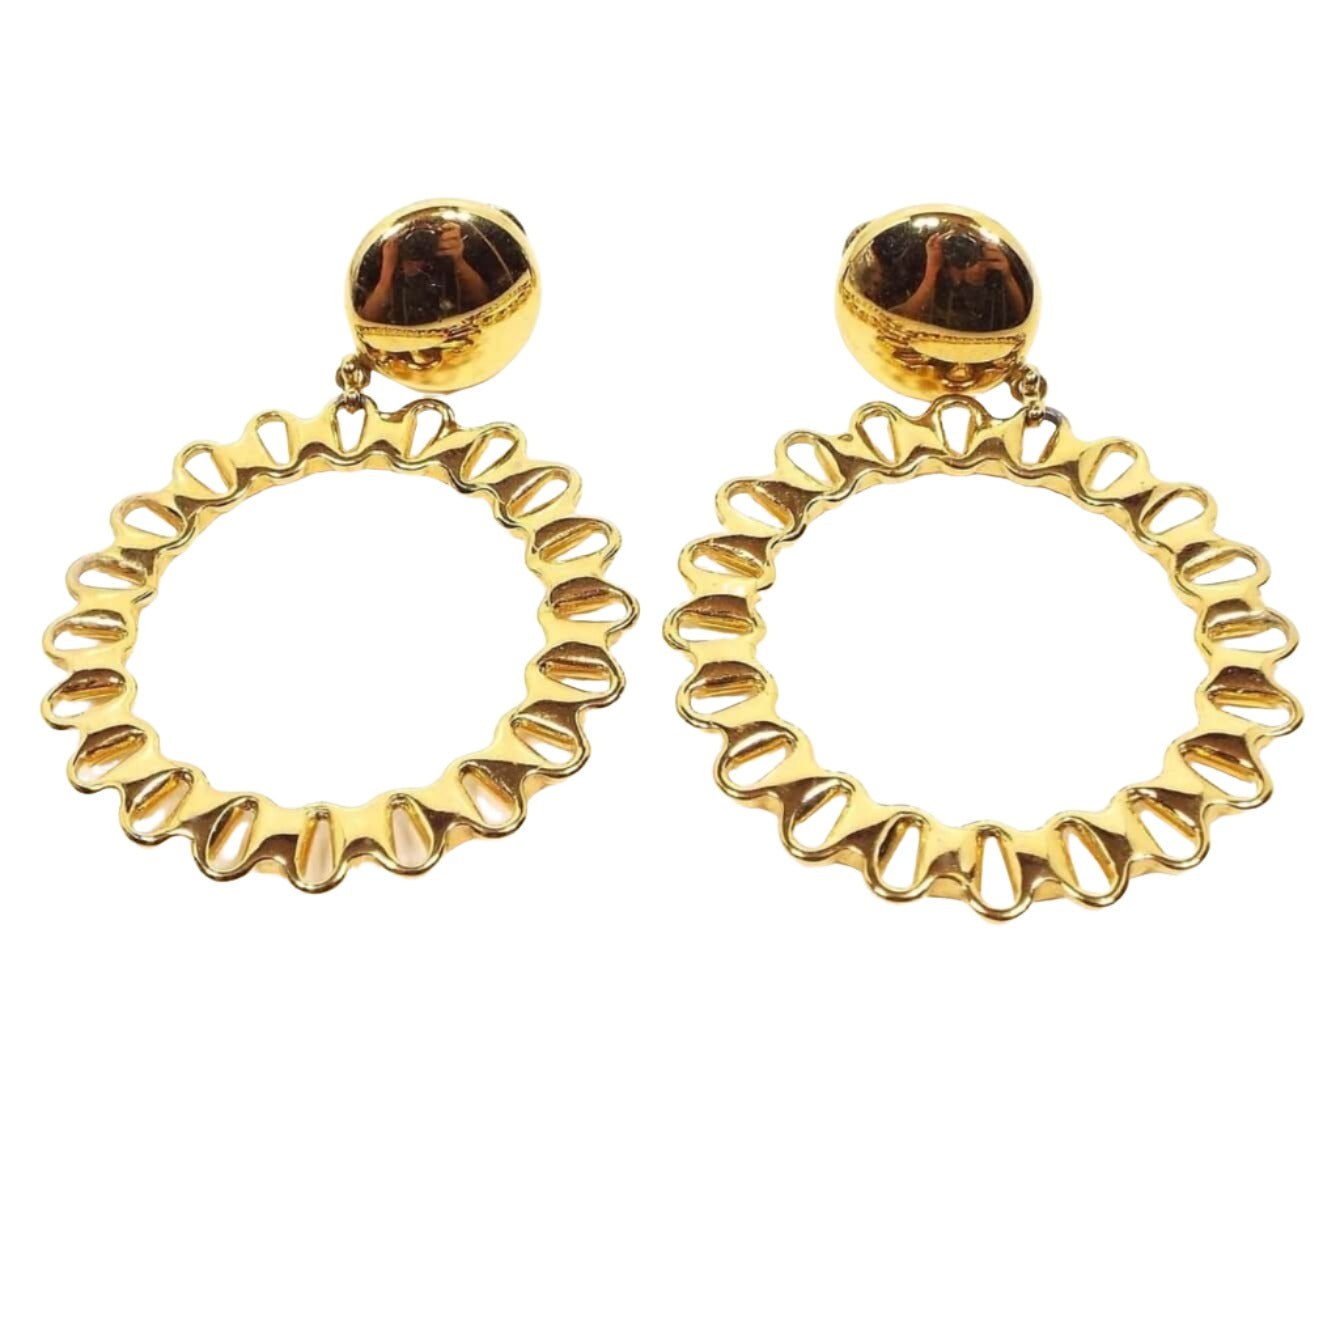 Front view of the retro vintage Monet clip on hoop earrings. The metal is gold tone in color. There is a round shiny area at the top where the clips are and large hoops dangling at the bottoms with a cut out teardrop shape design all the way around the hoops.